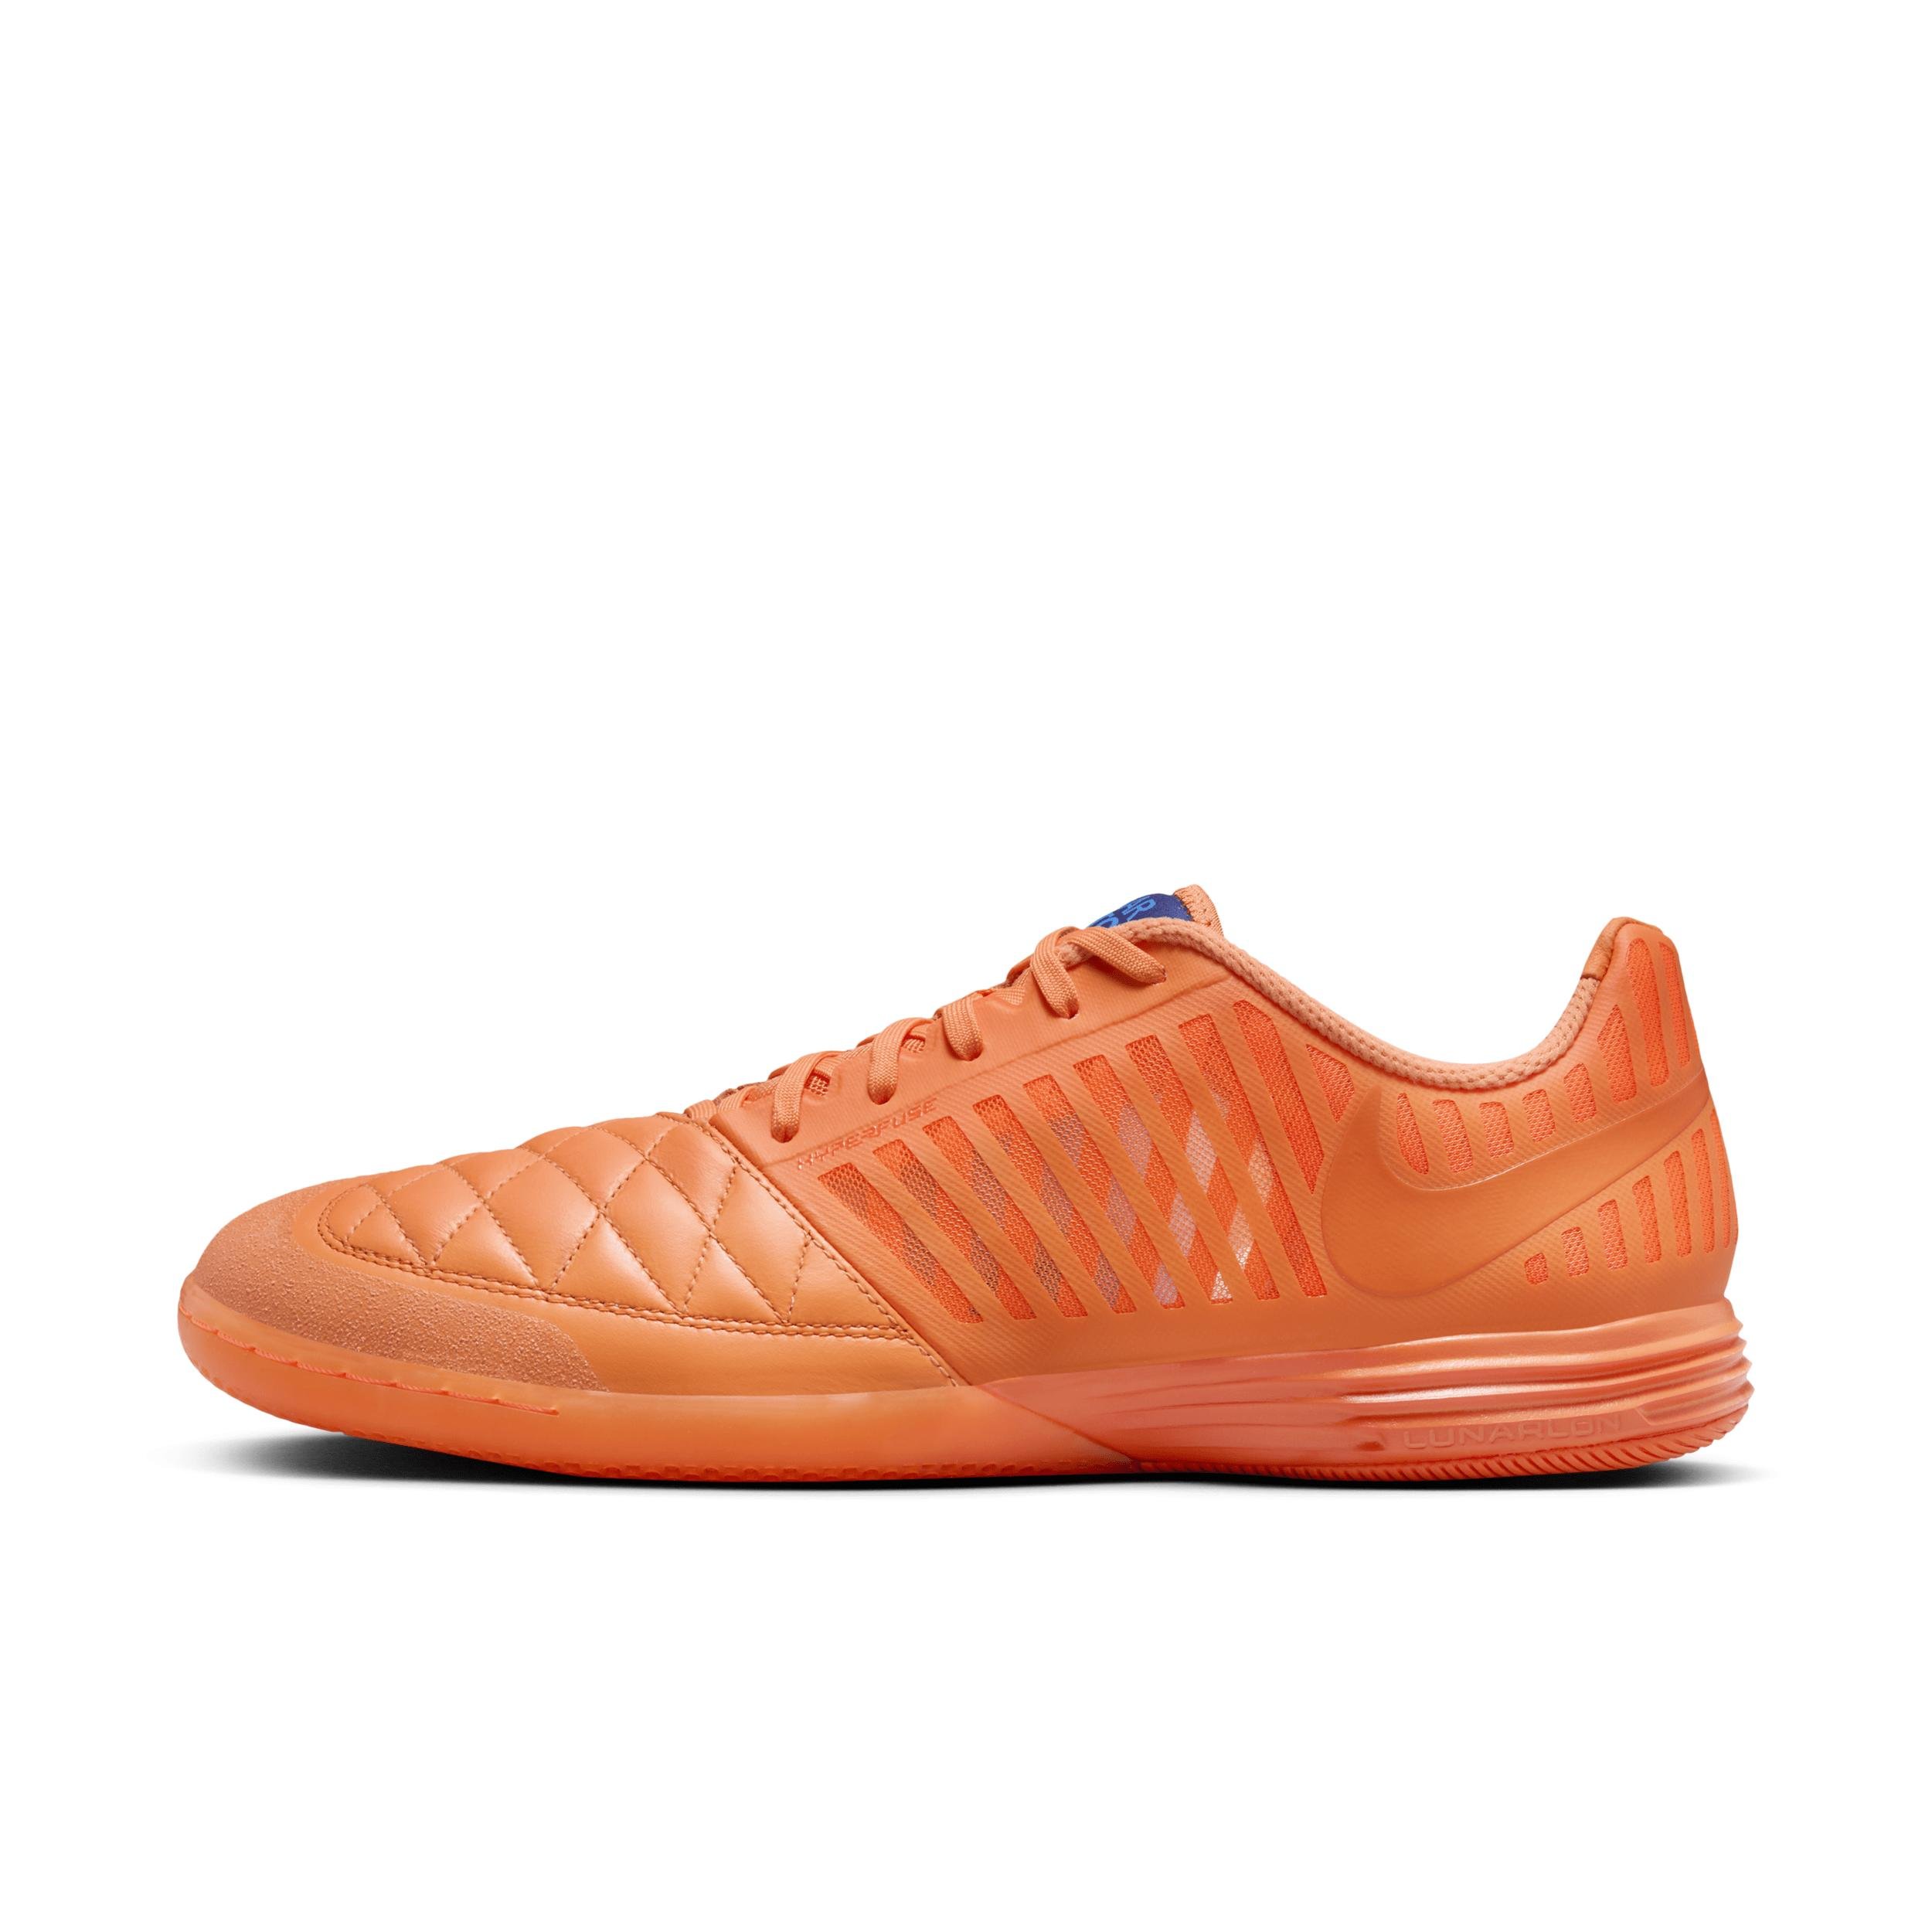 Nike Men's Lunargato II Indoor/Court Low-Top Soccer Shoes by NIKE